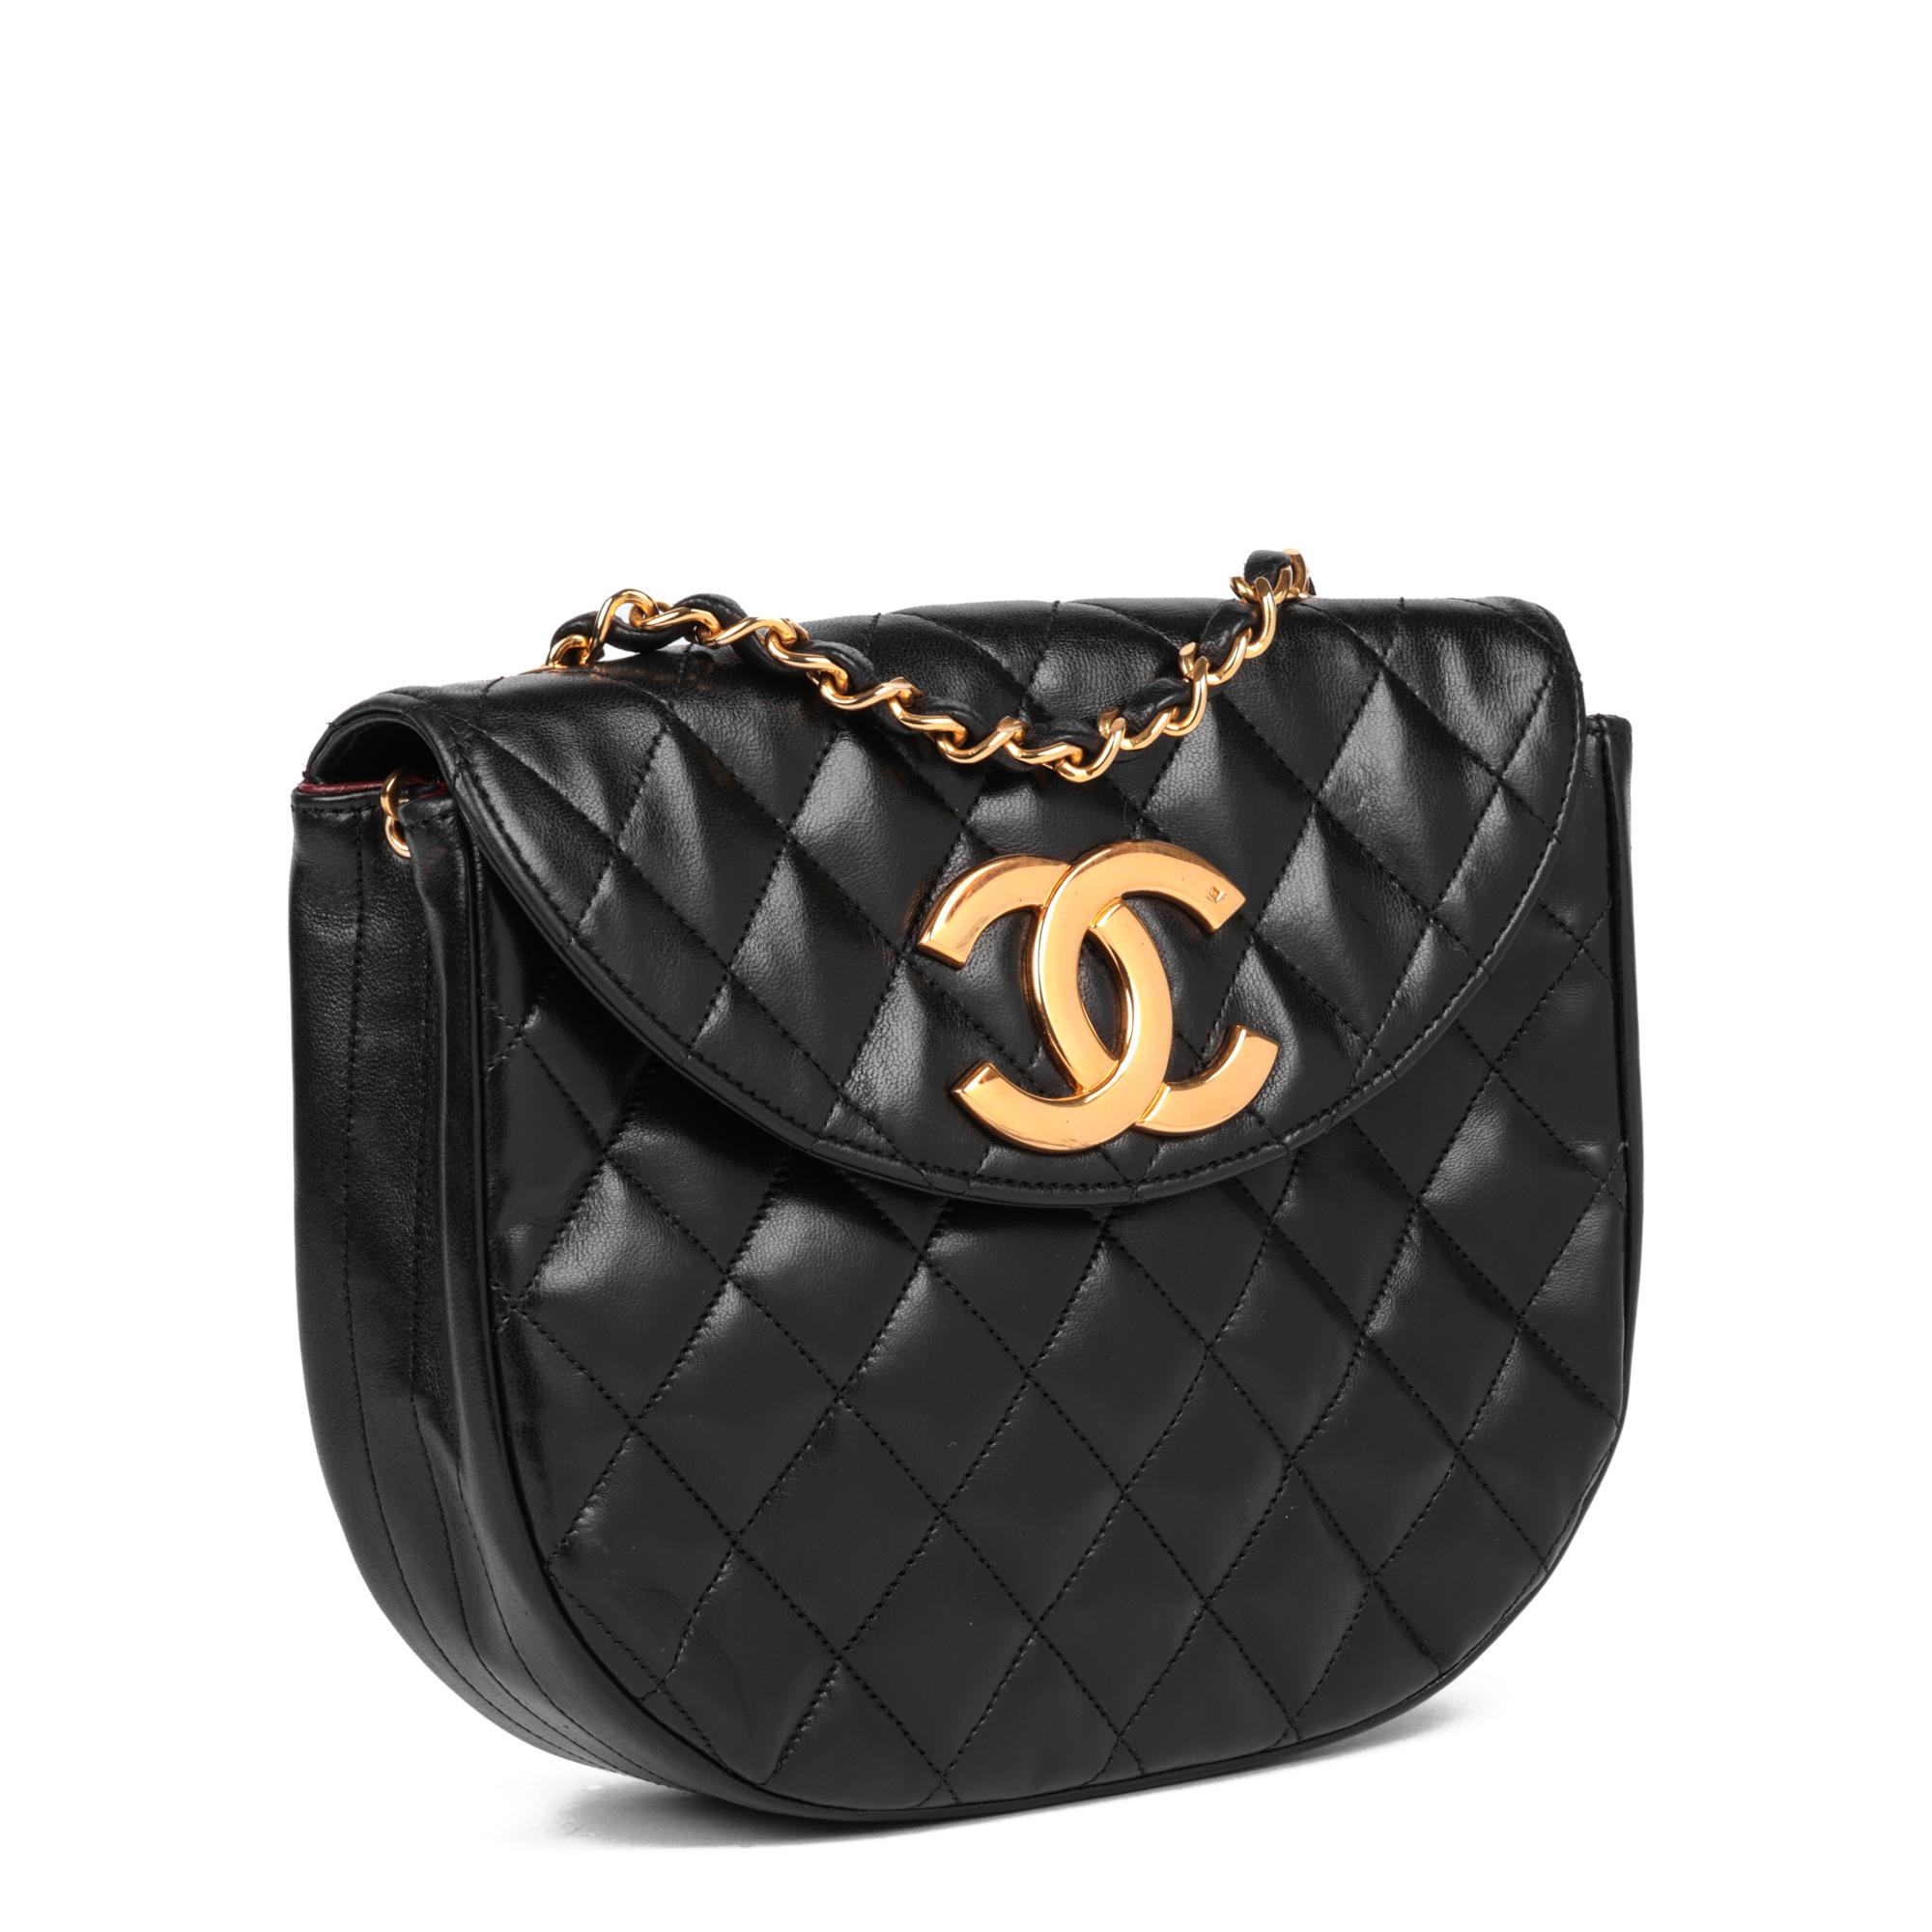 CHANEL
Black Quilted Lambskin Vintage XL Half Moon Mini Flap Bag

Serial Number: 0771433
Age (Circa): 1989
Accompanied By: Chanel Dust Bag, Authenticity Card
Authenticity Details: Authenticity Card, Serial Sticker (Made in France)
Gender: